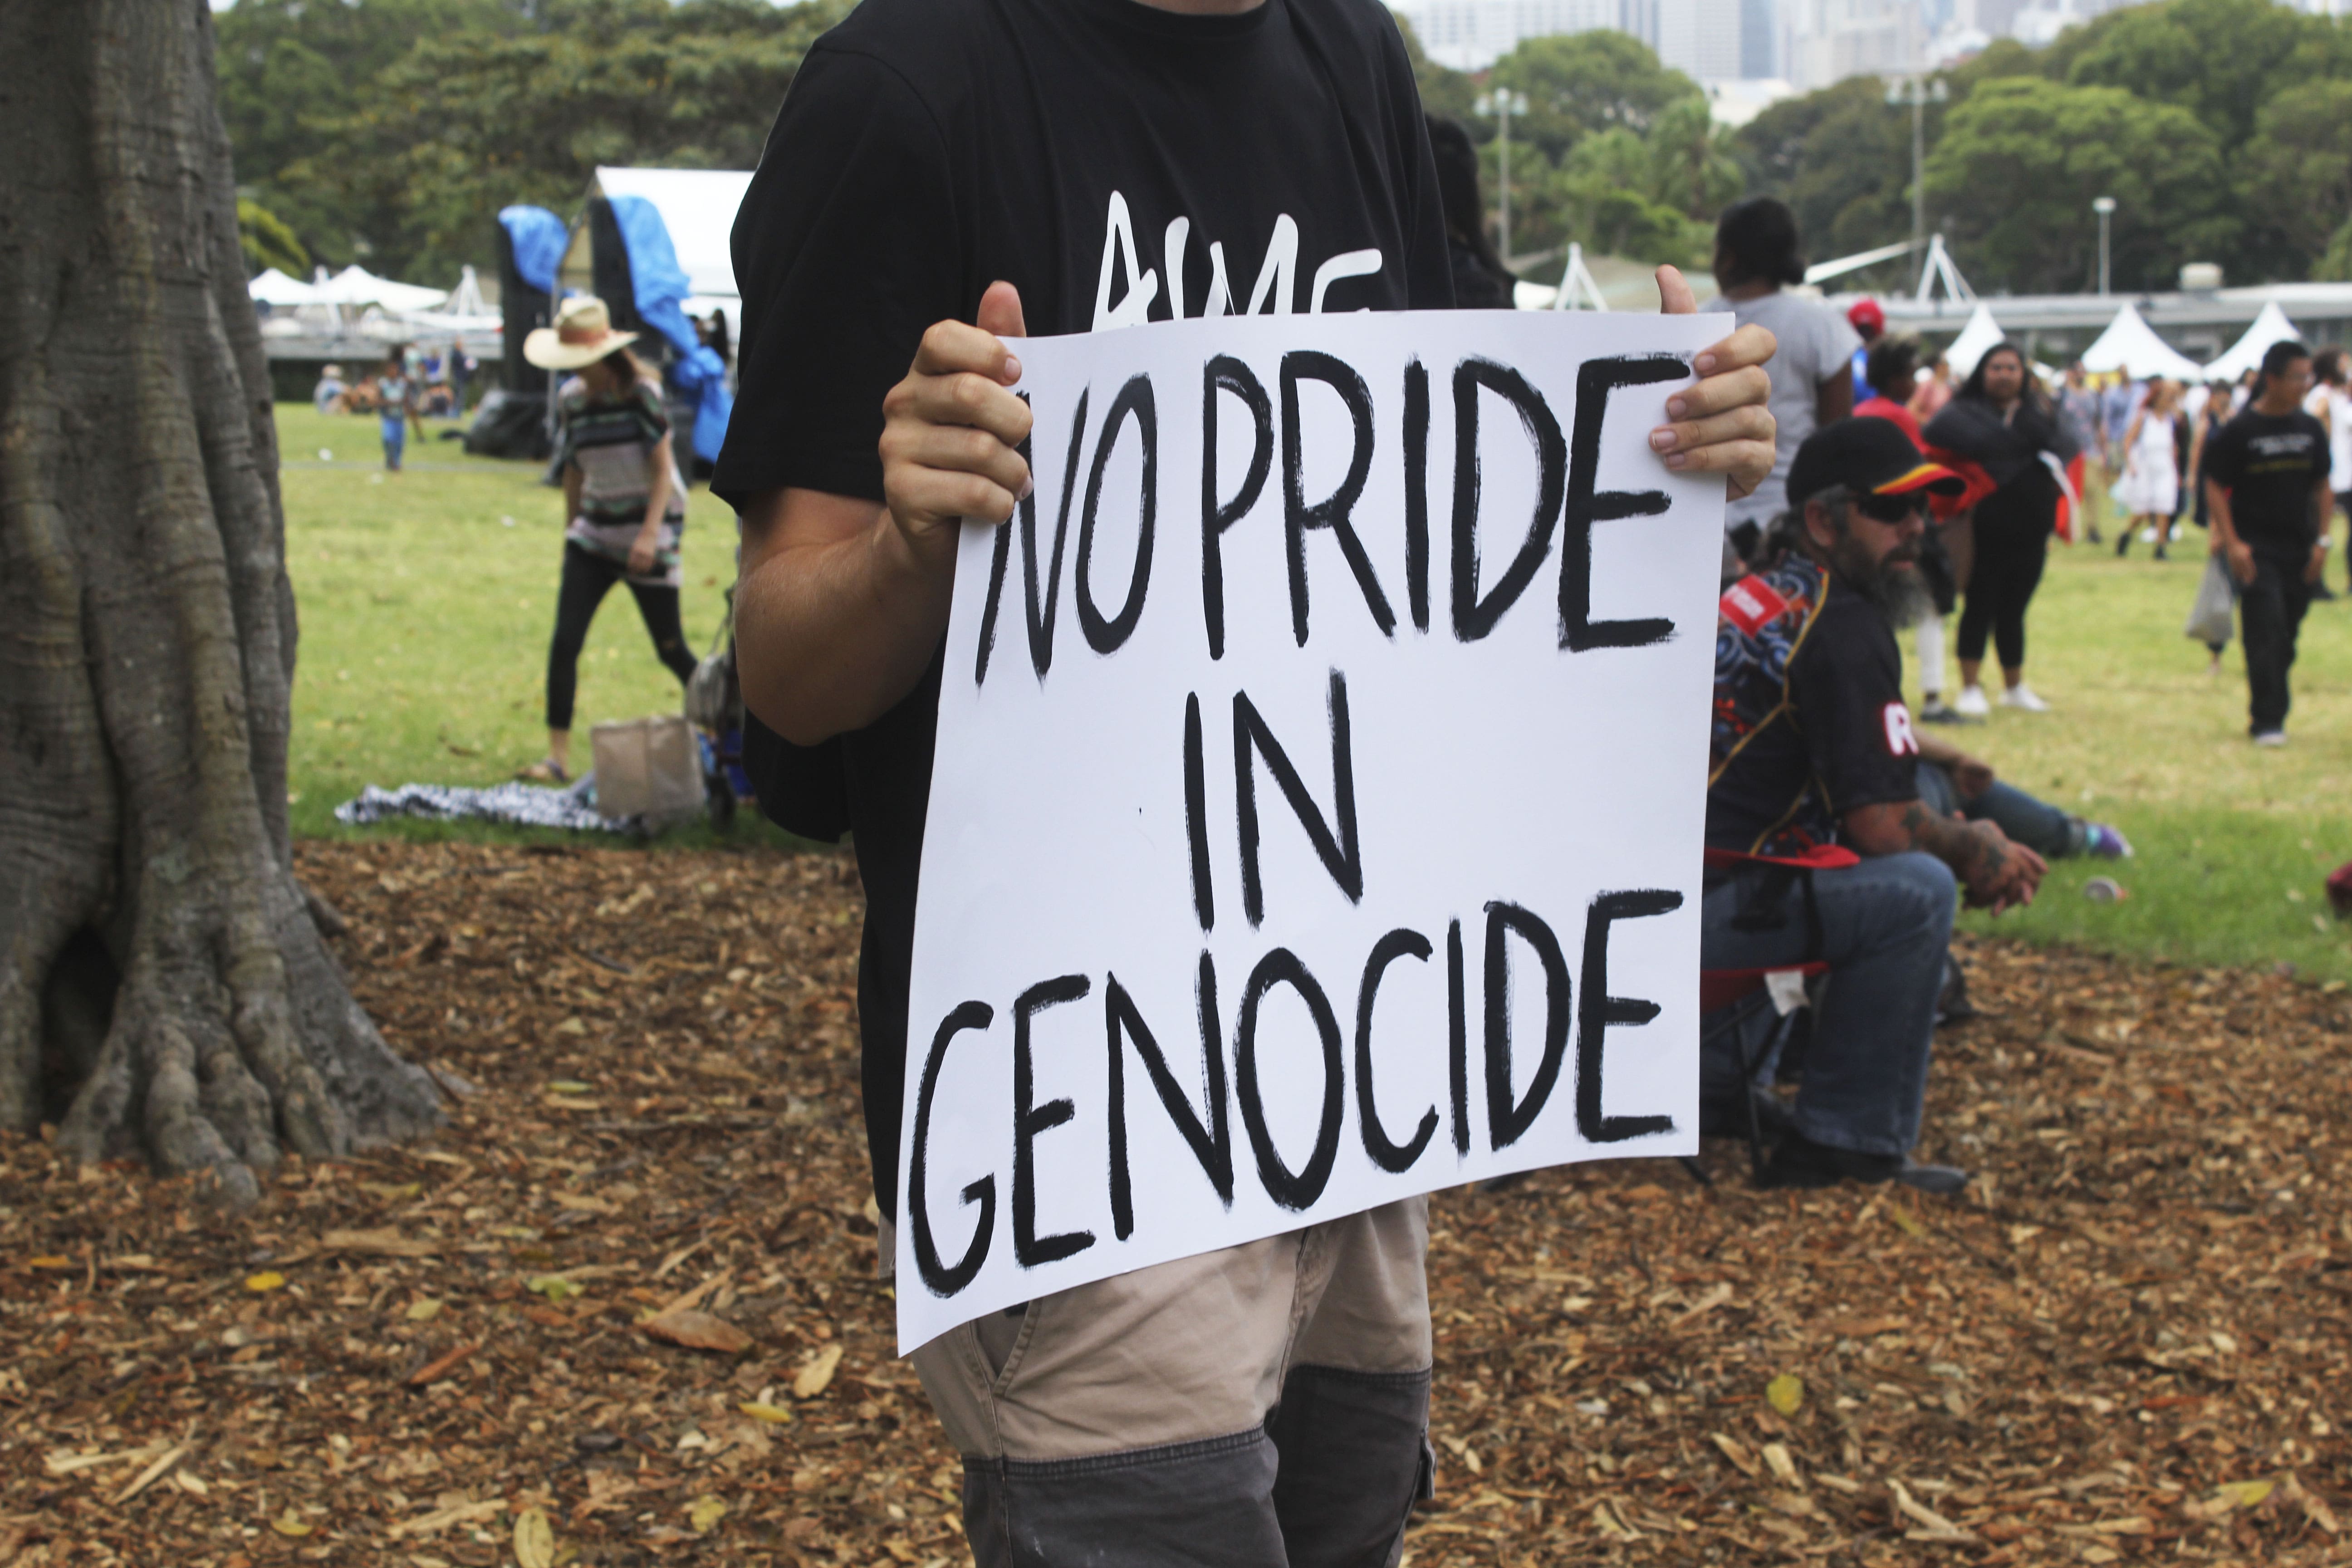 Protester holds sign reading 'no pride in genocide'.